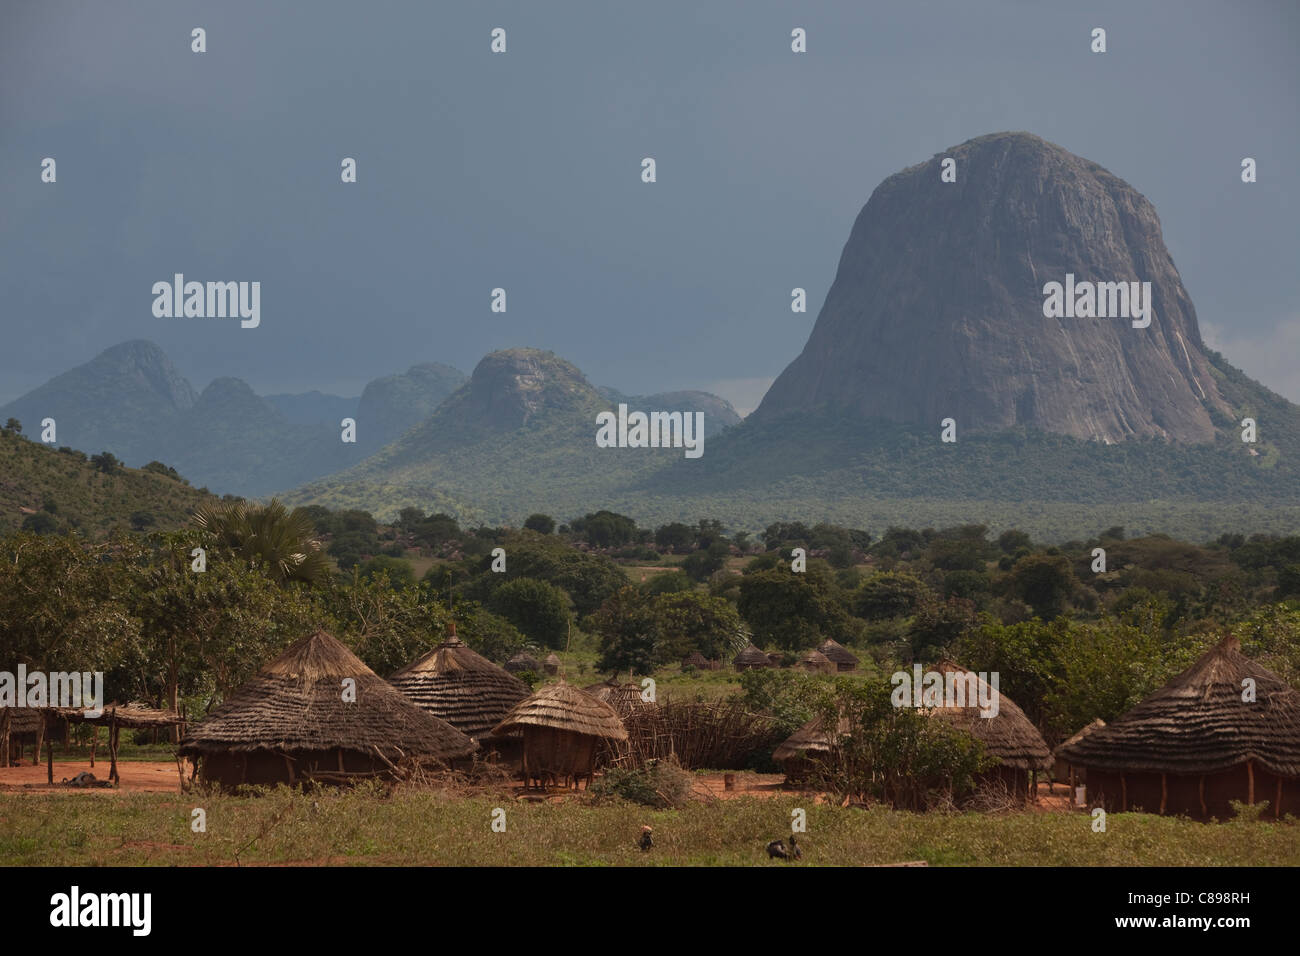 Hills rise above grass huts in Abim district, northern Uganda, East Africa. Stock Photo